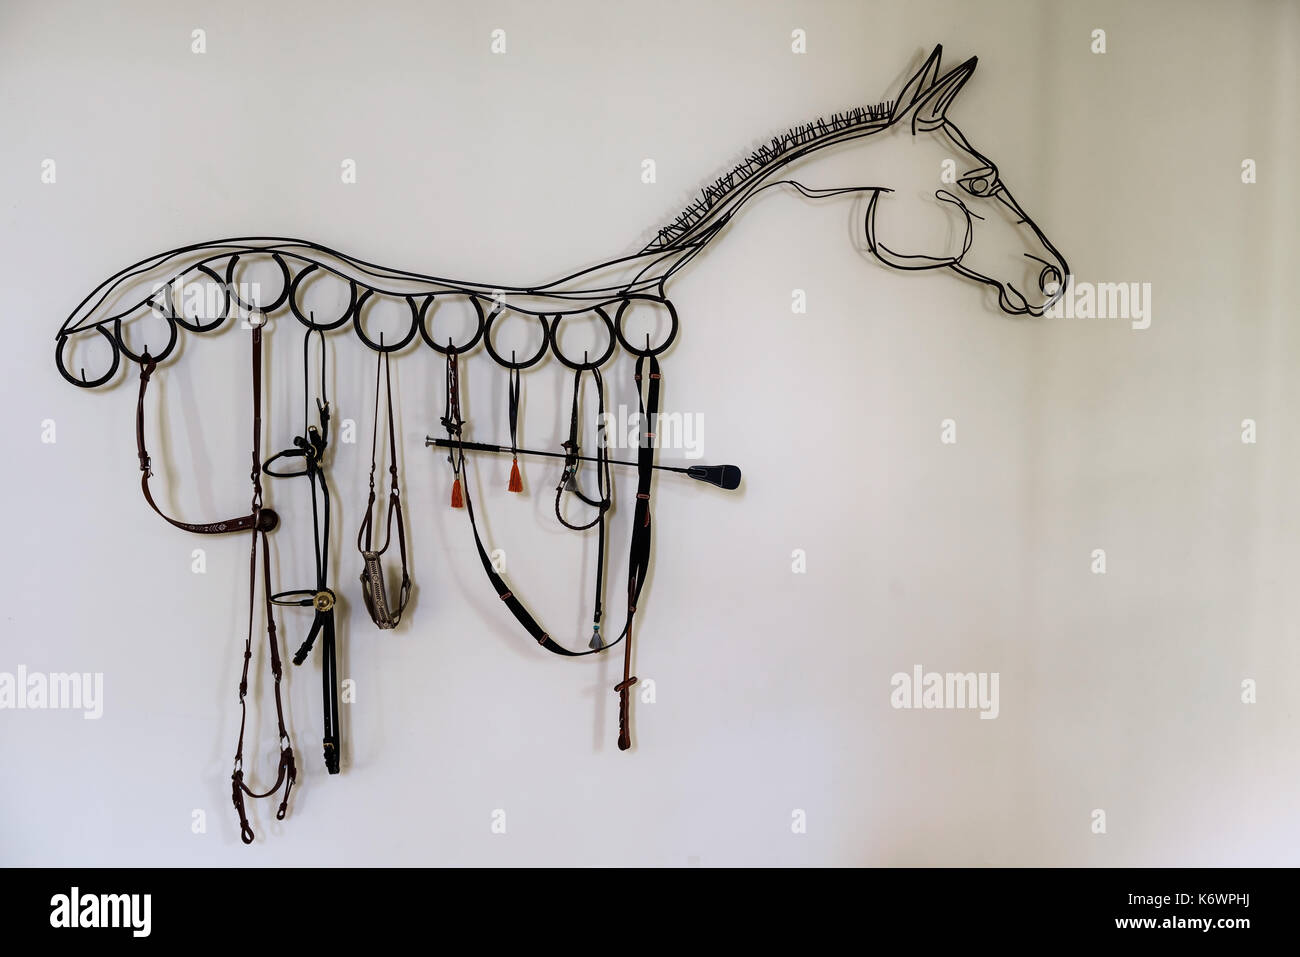 Artificial Horse shape decoration interior made by bridle attached on stable white wall by front view Stock Photo